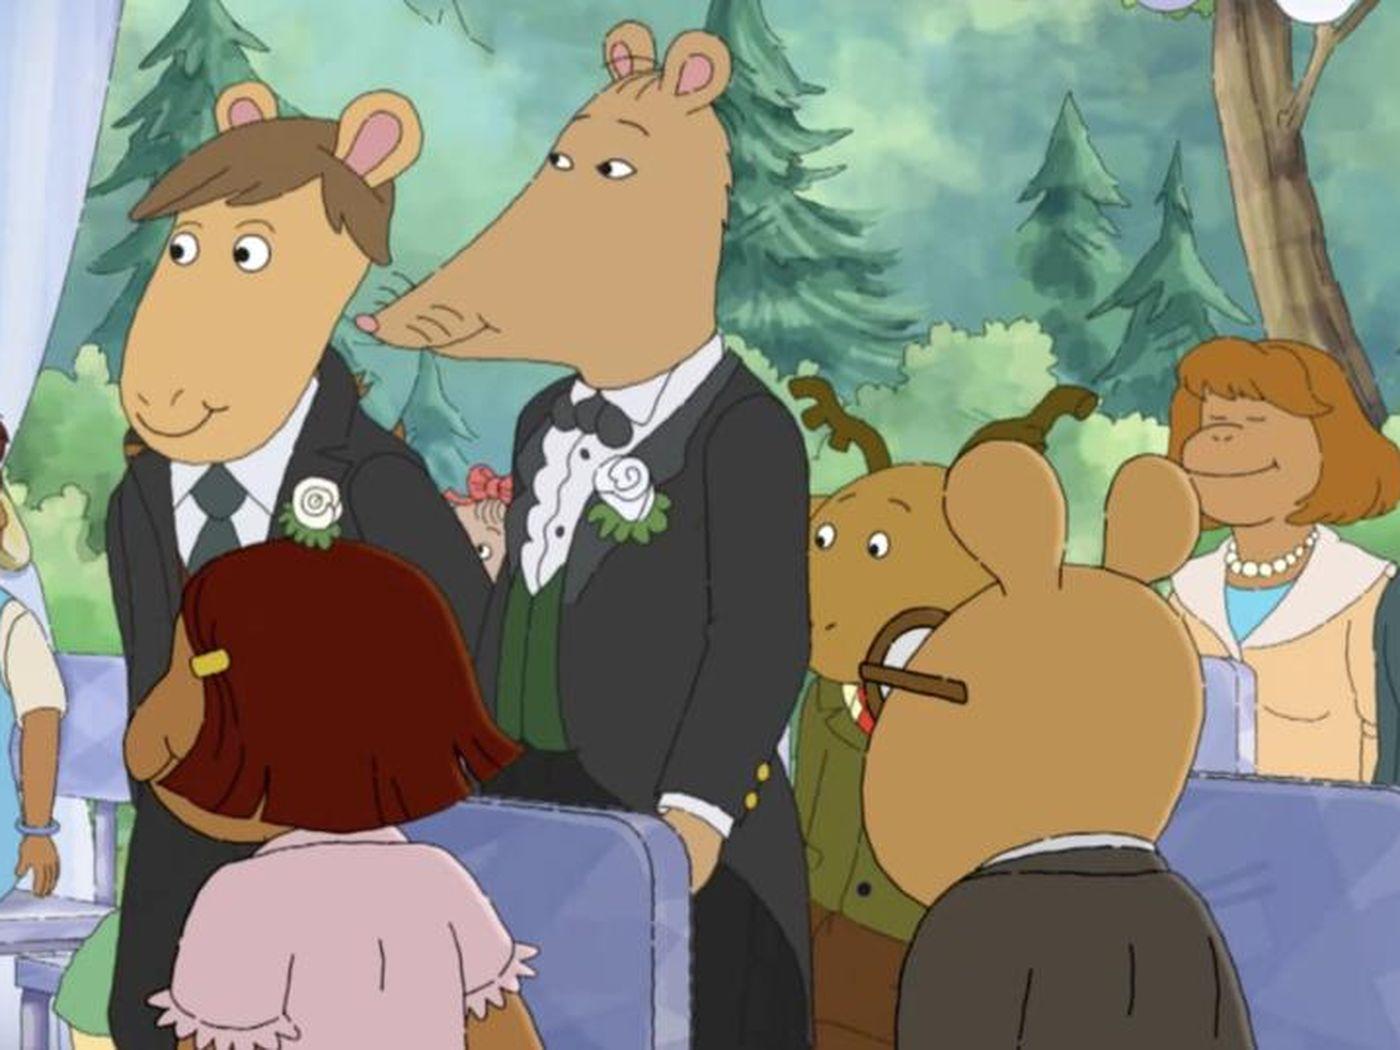 Kids' TV rarely shows gay marriage, but PBS's Arthur did with Mr. Ratburn's wedding